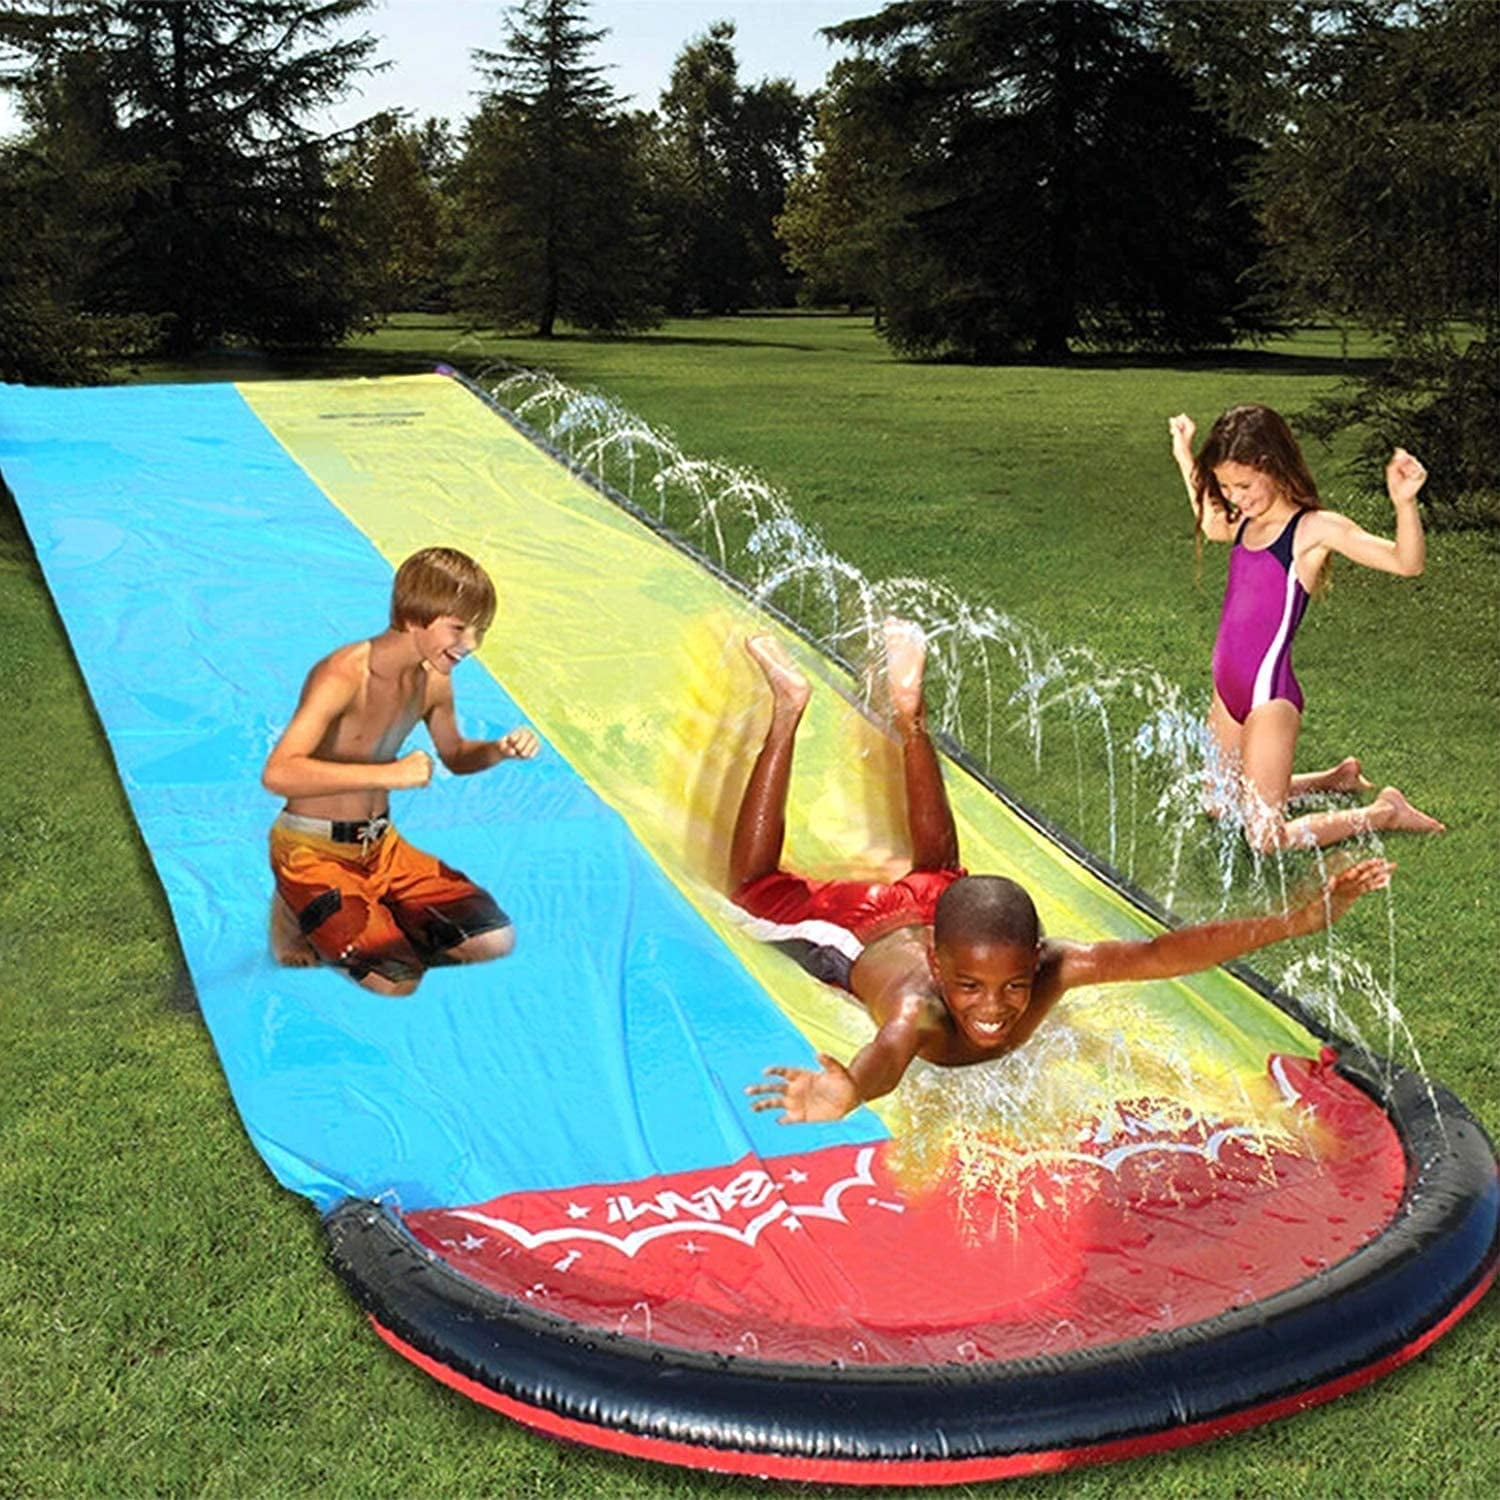 Slip and Slide Inflatable Lawn Water Slide with Sprinkler Sports Outdoor Garden Backyard Water Play Toys for Adults Kids Family Games Slip n Slide Summer Toy with 2 Bodyboards 